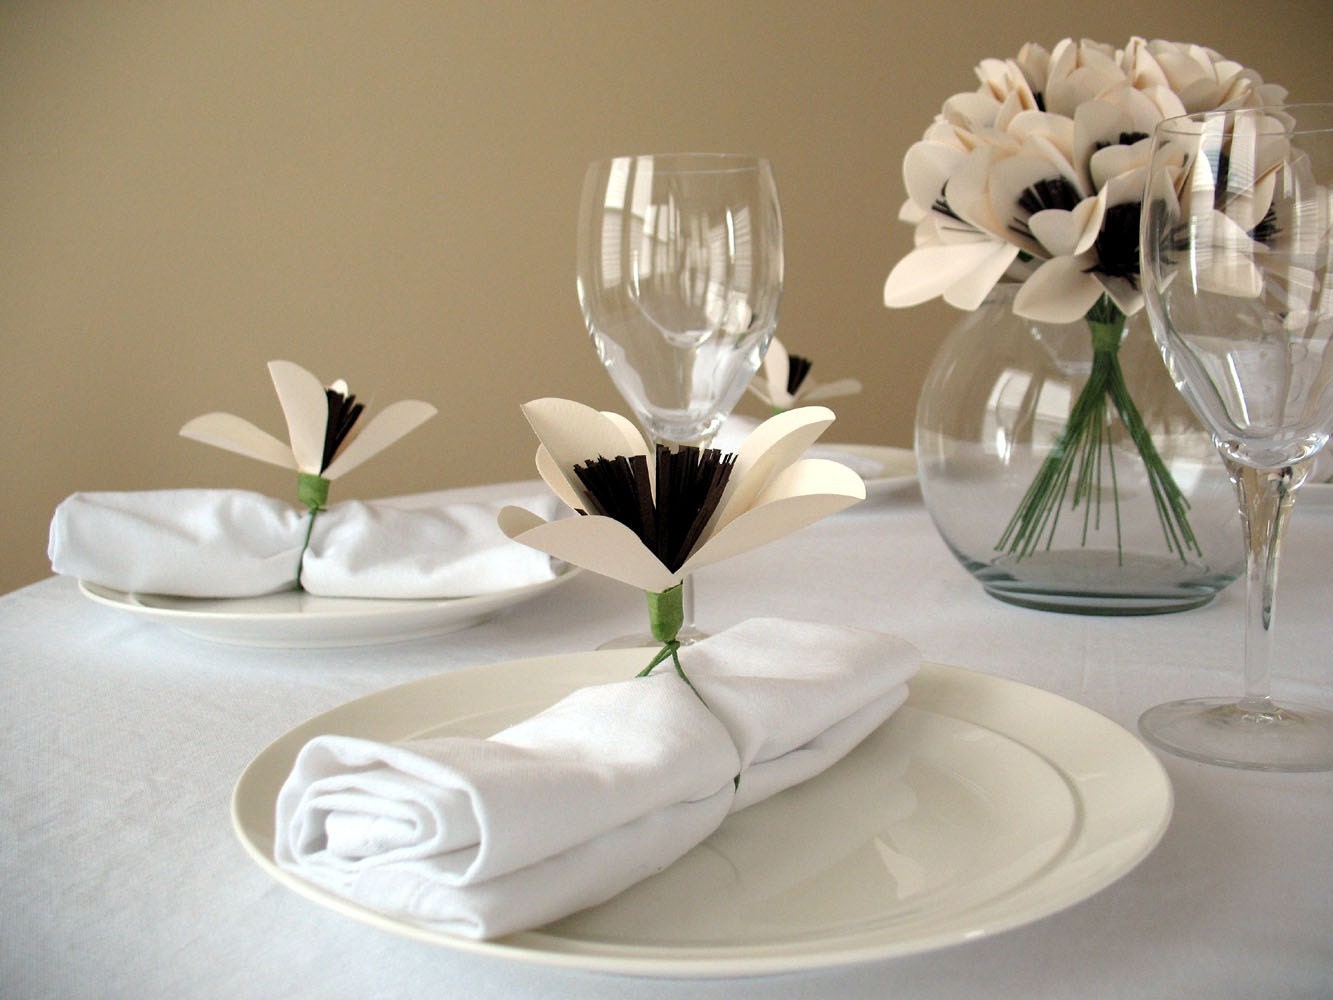 I'm completely swooning over these paper flower centerpieces from Die Cut